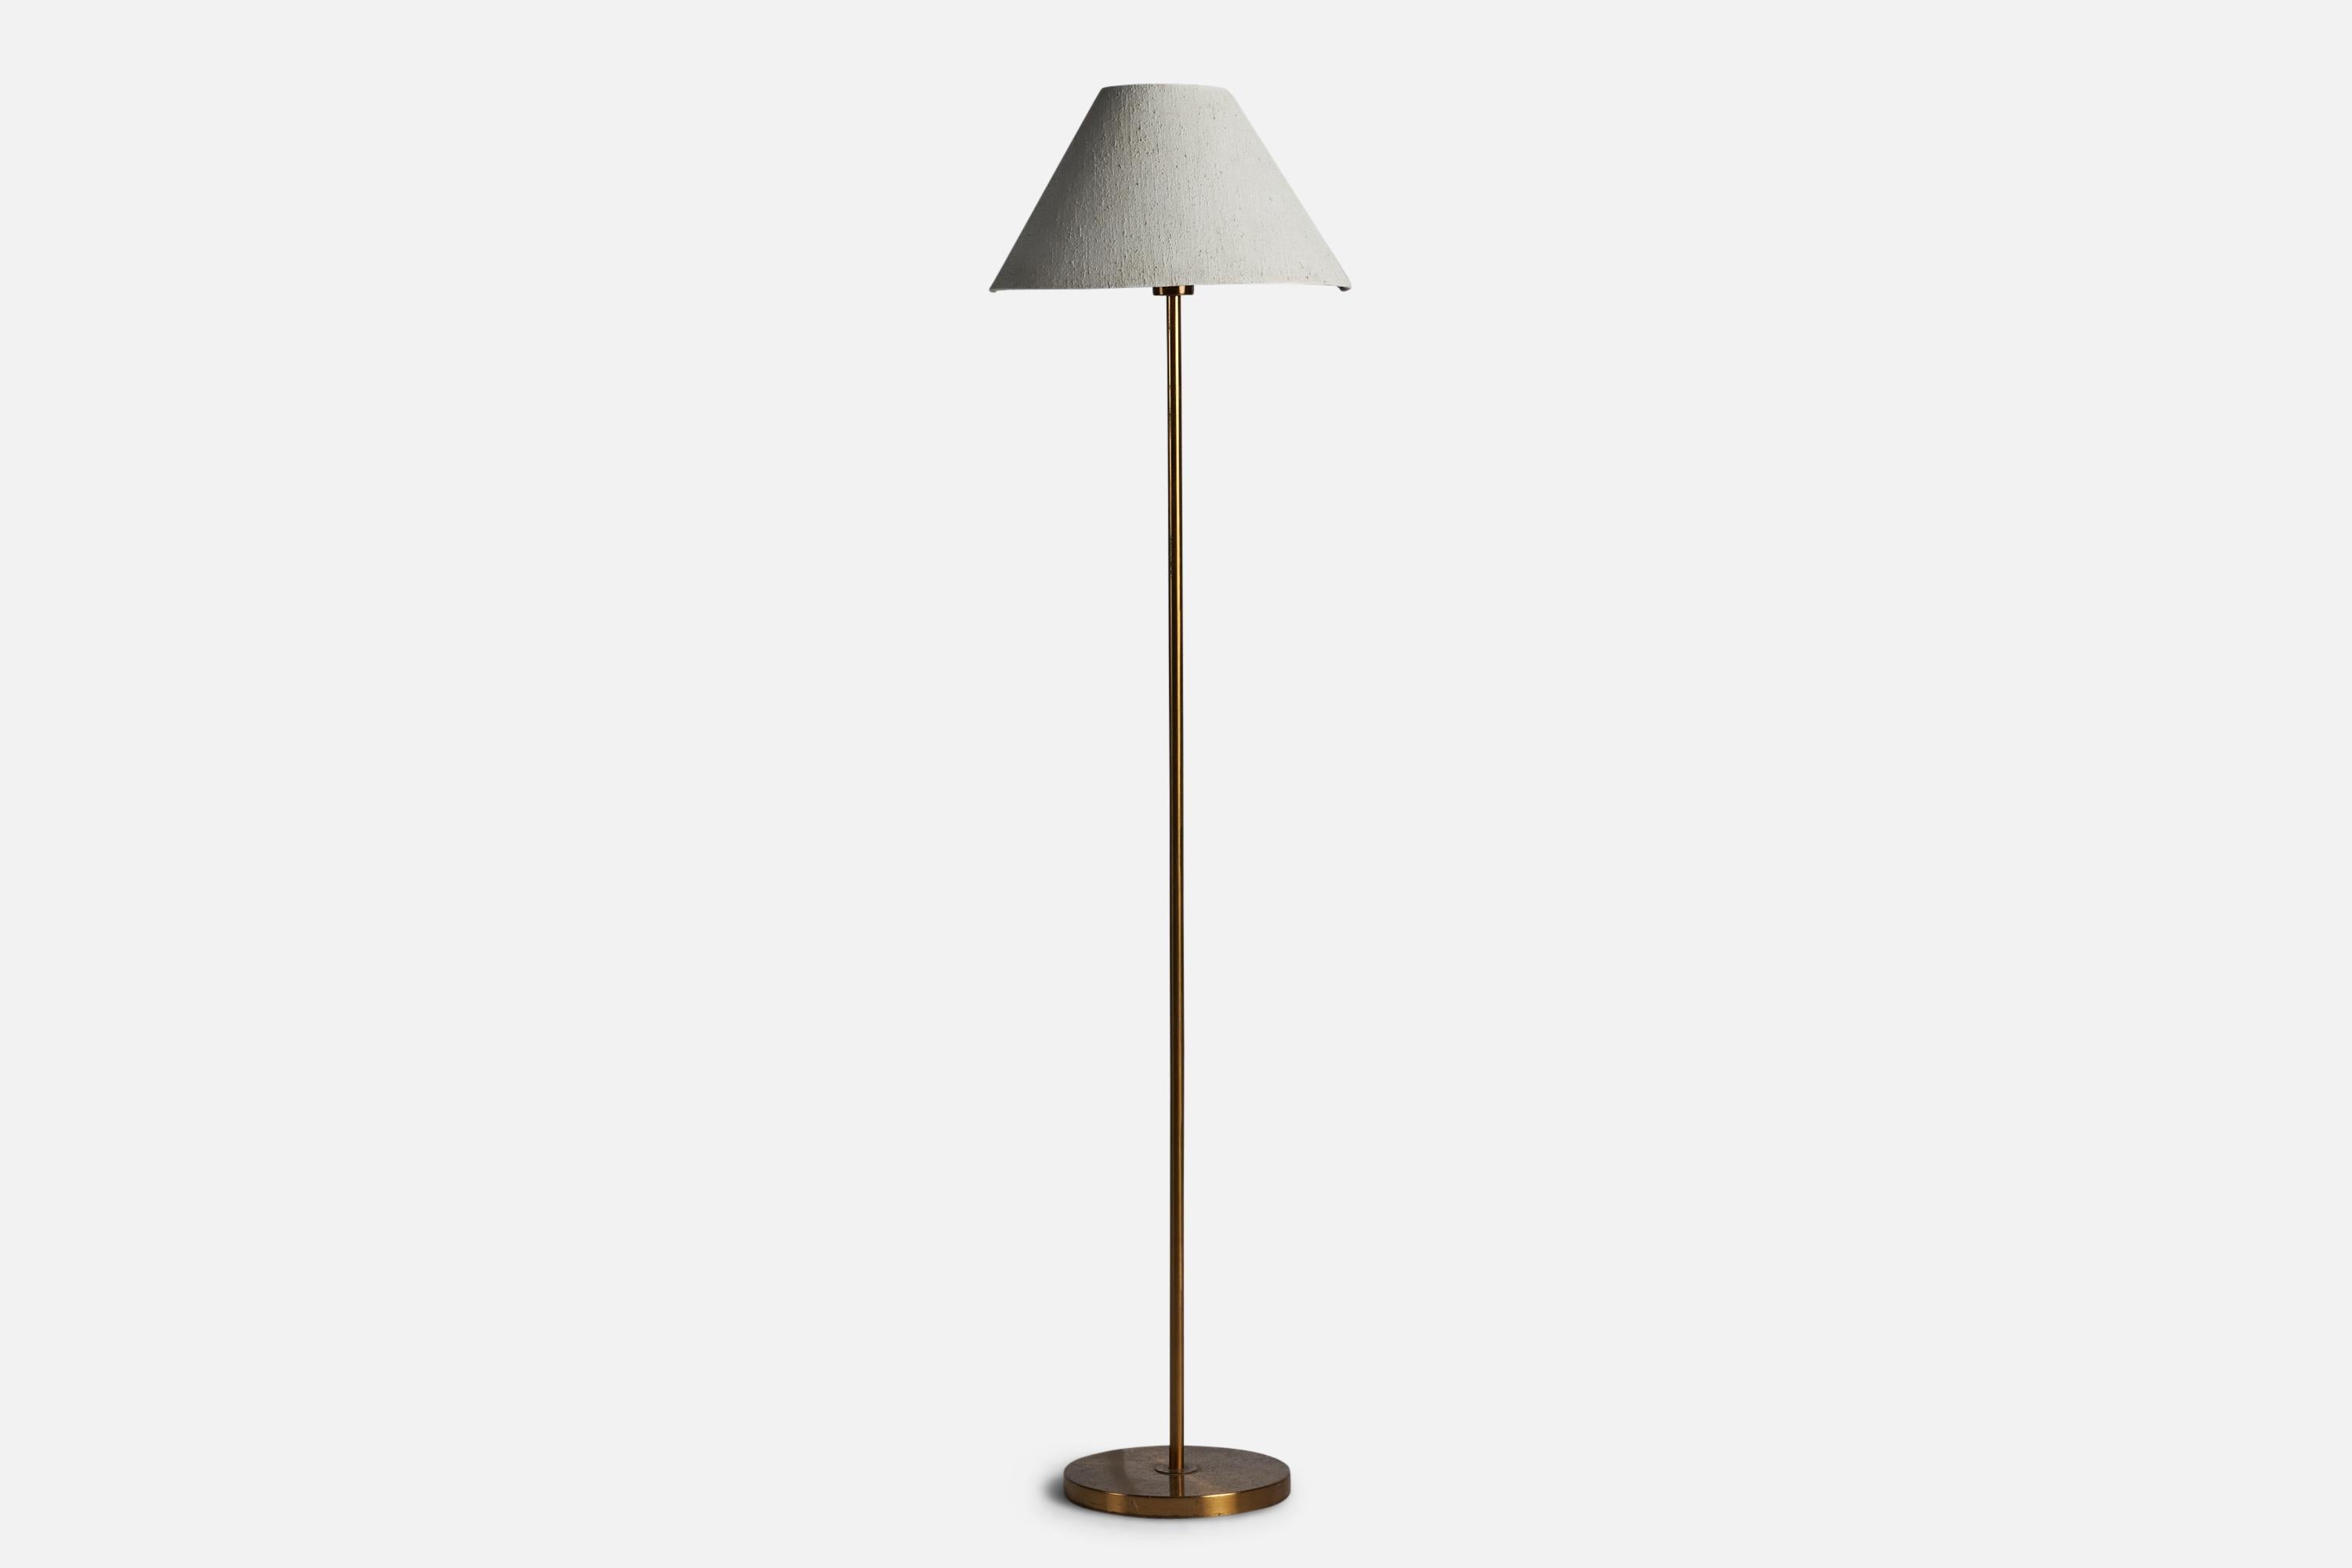 A brass and white fabric floor lamp designed and produced in Sweden, 1950s.

Overall Dimensions (inches): 58.5” H x 14.5” W x 9.5” D
Bulb Specifications: E-26 Bulb
Number of Sockets: 1
All lighting will be converted for US usage. We are unable to